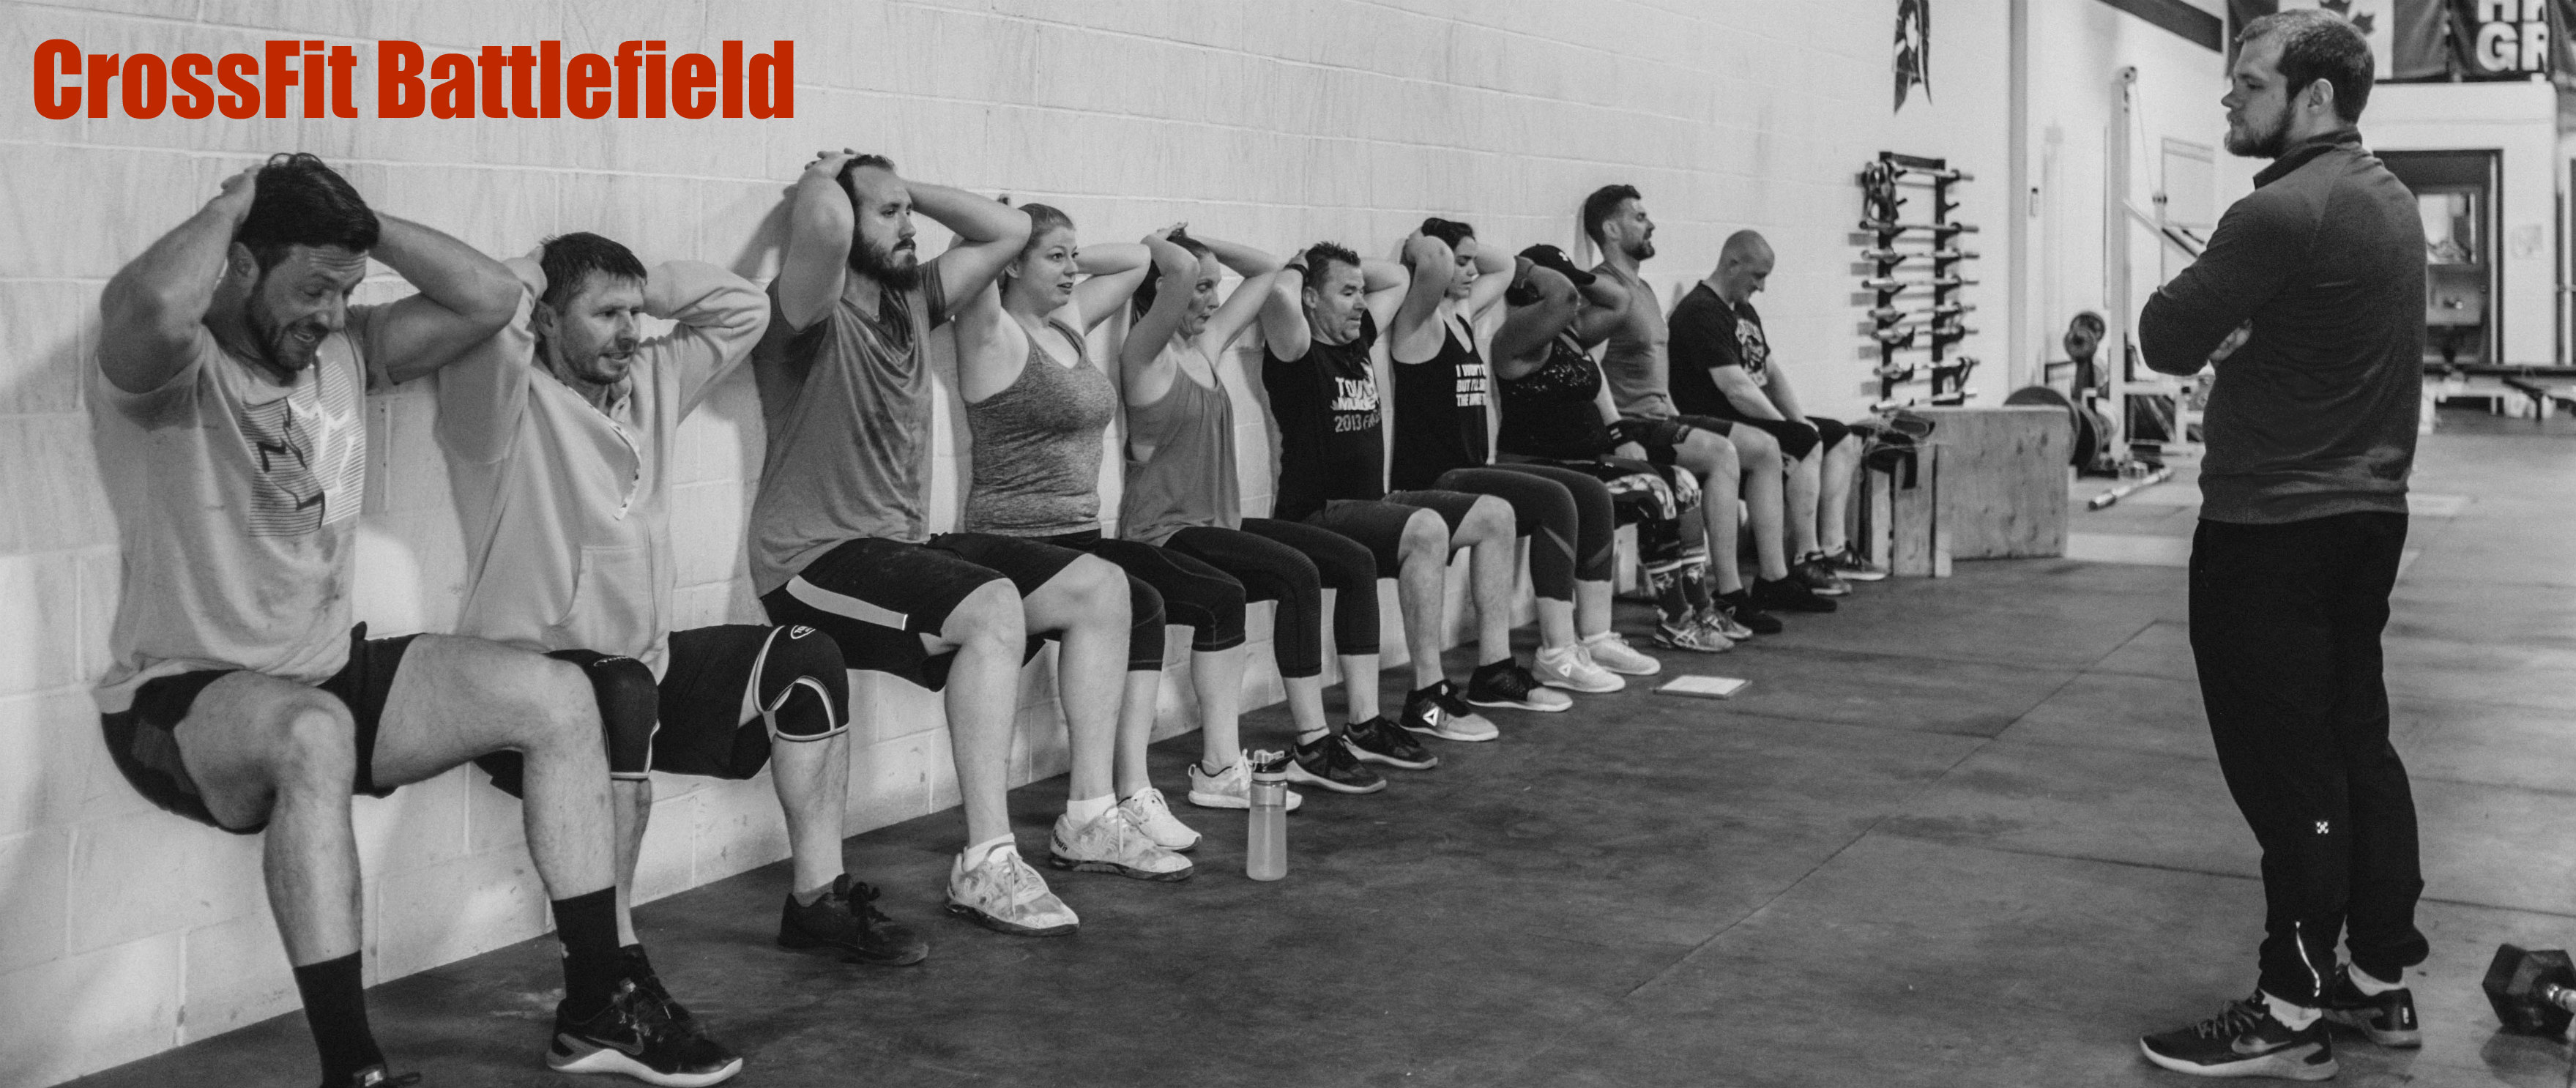 People doing wall squats at the Crossfit Battlefield gym while a coach watches